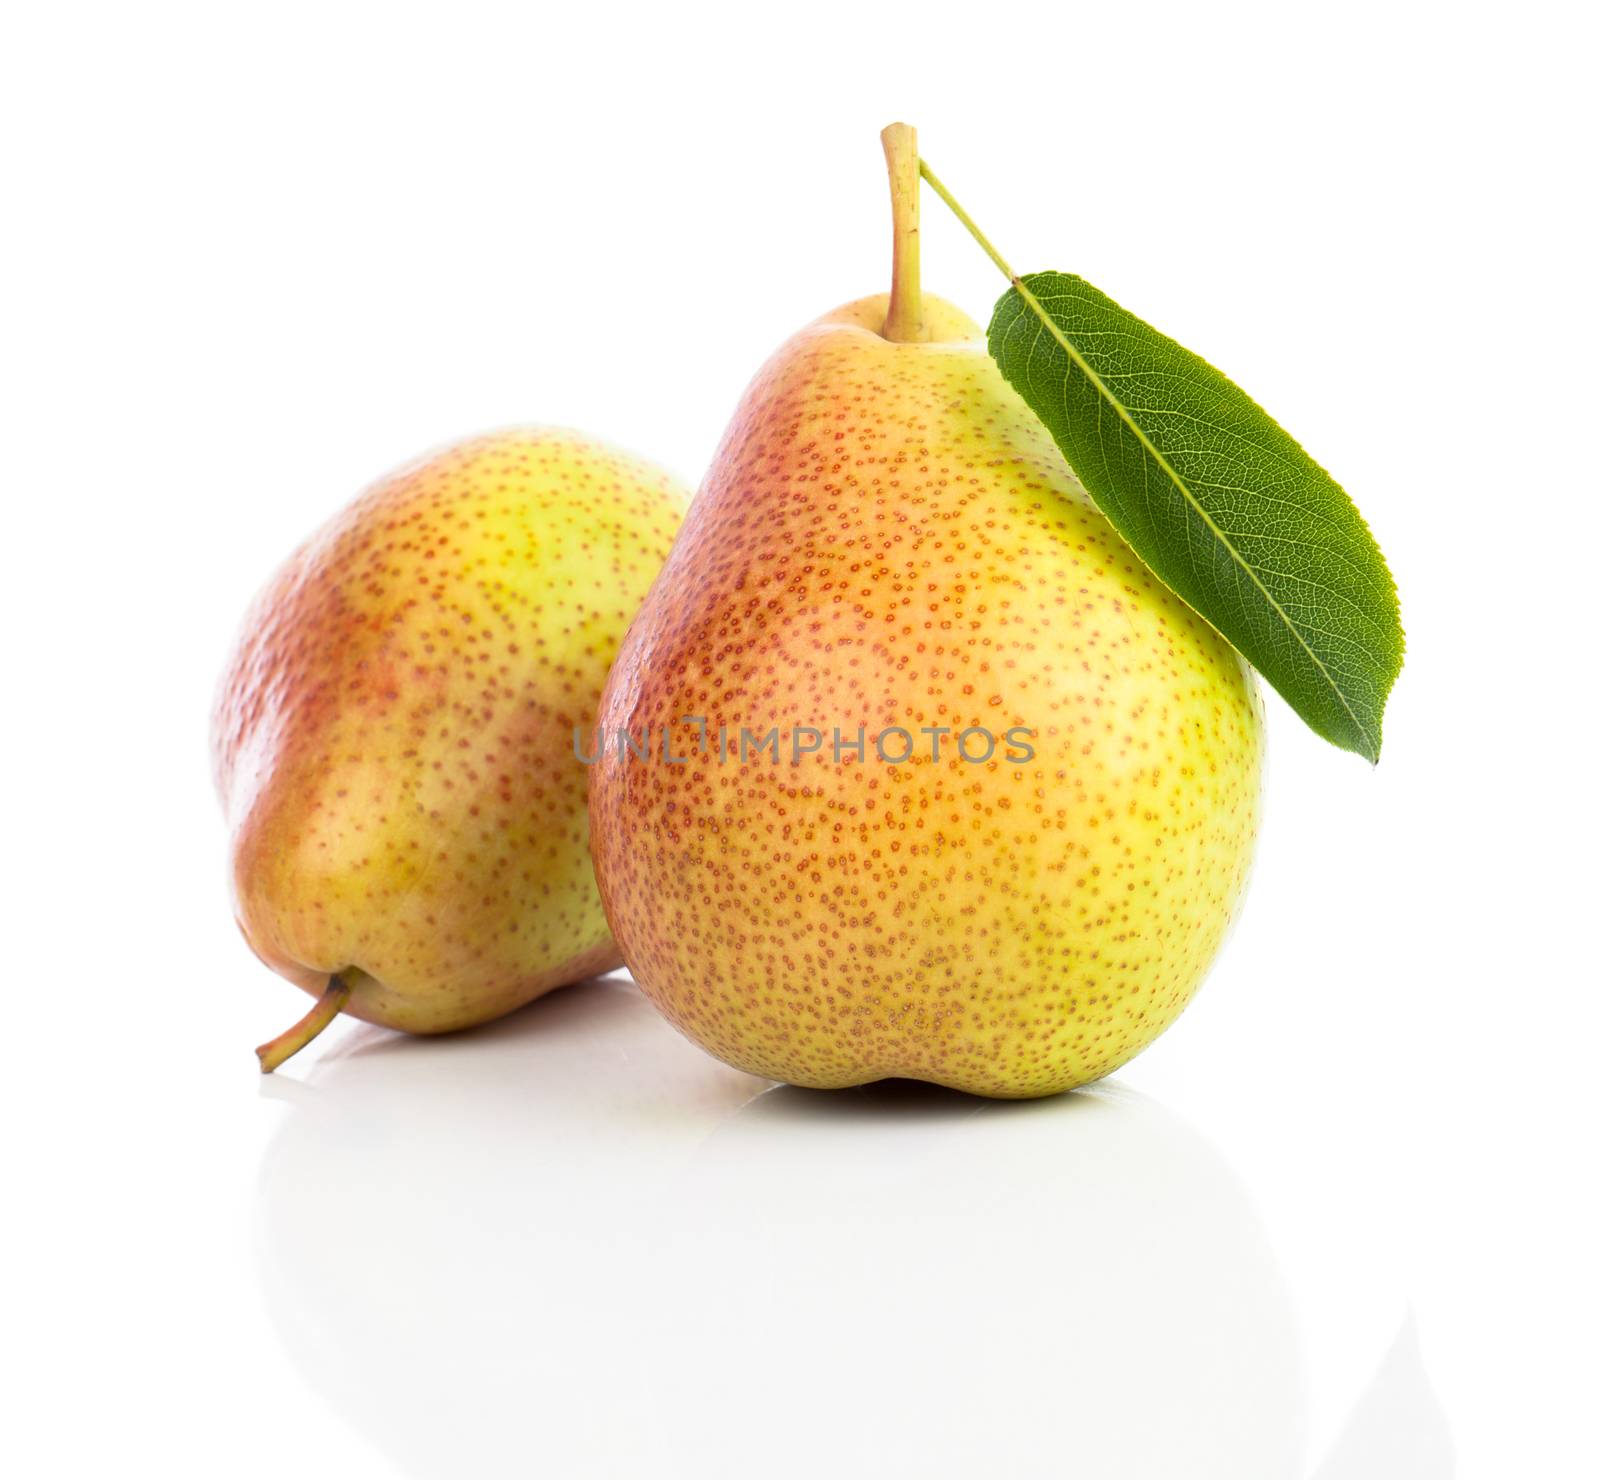 Pear with leaf isolated on white background by motorolka